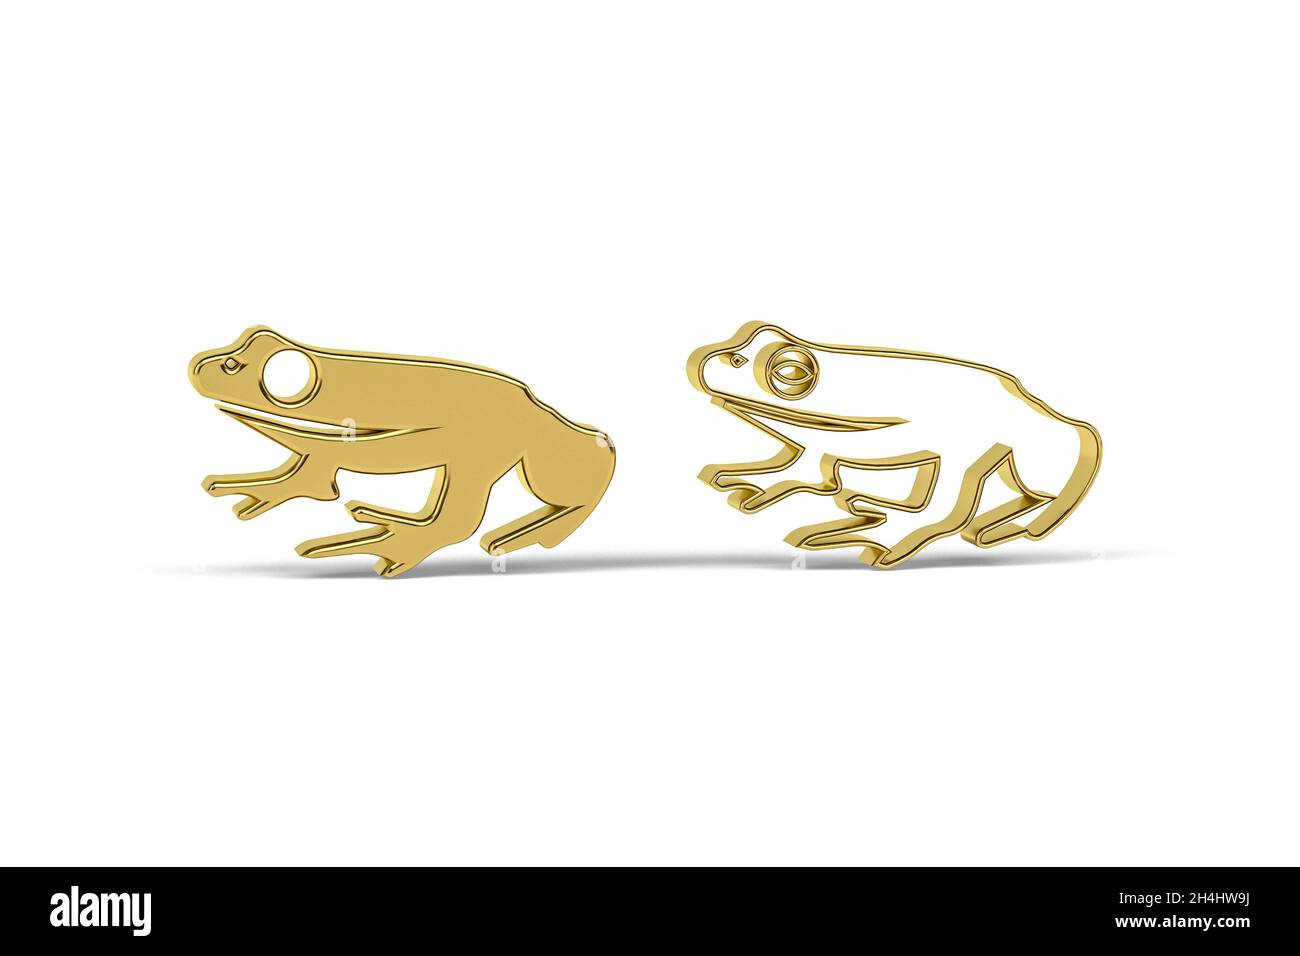 Golden 3d frog icon isolated on white background - 3d render Stock Photo